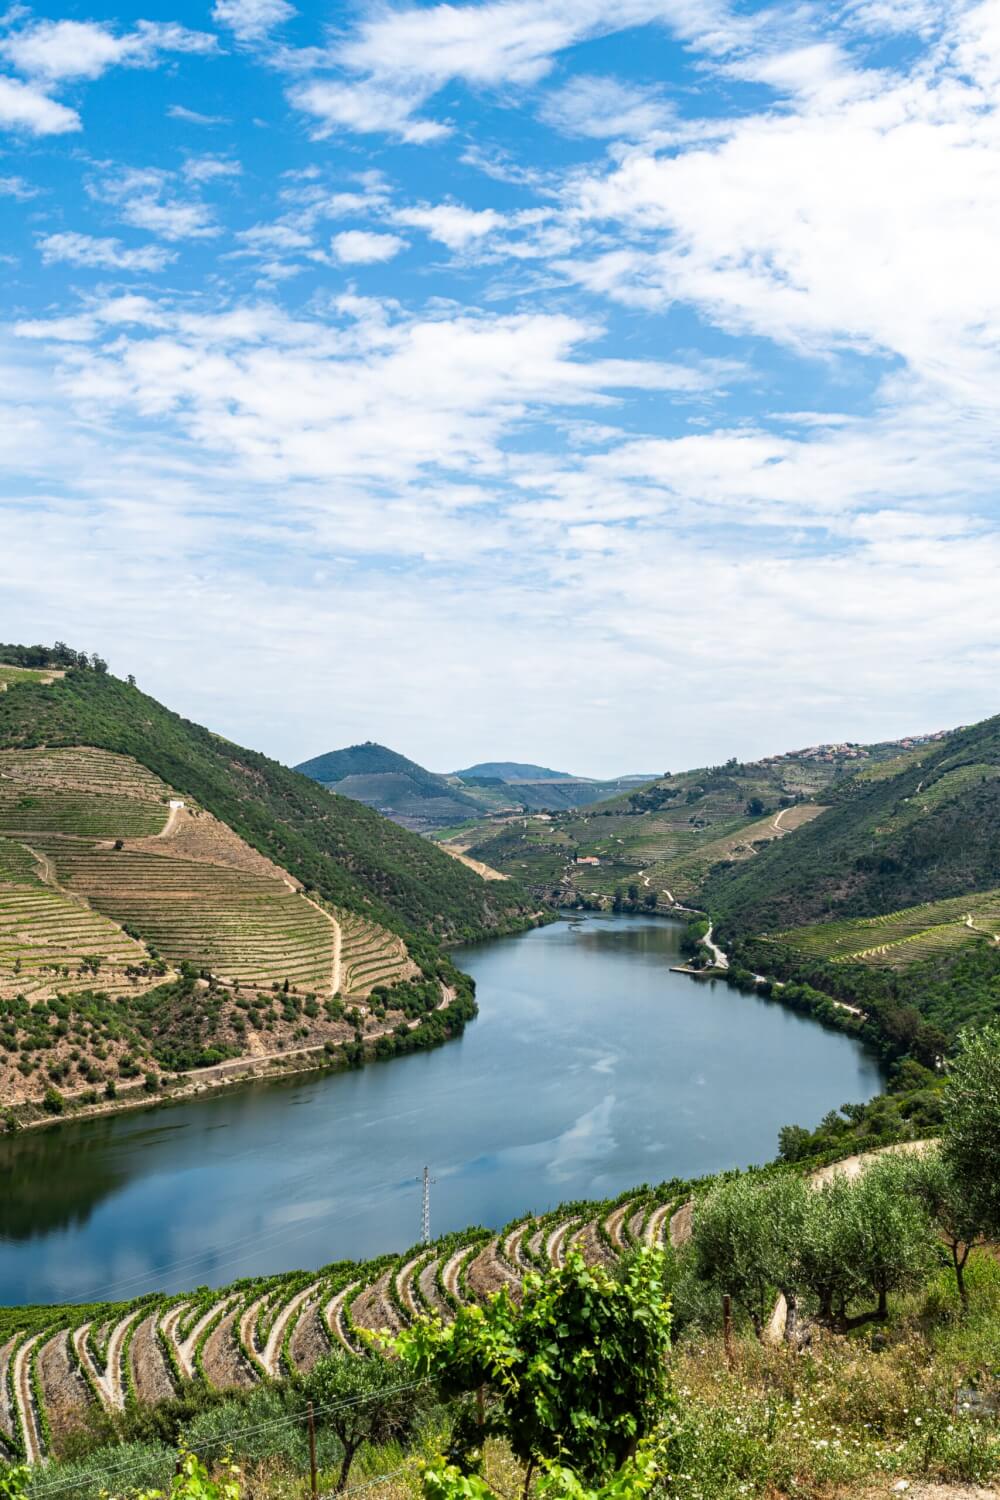 A river cutting through a valley, with terraced vineyards as far as the eye can see